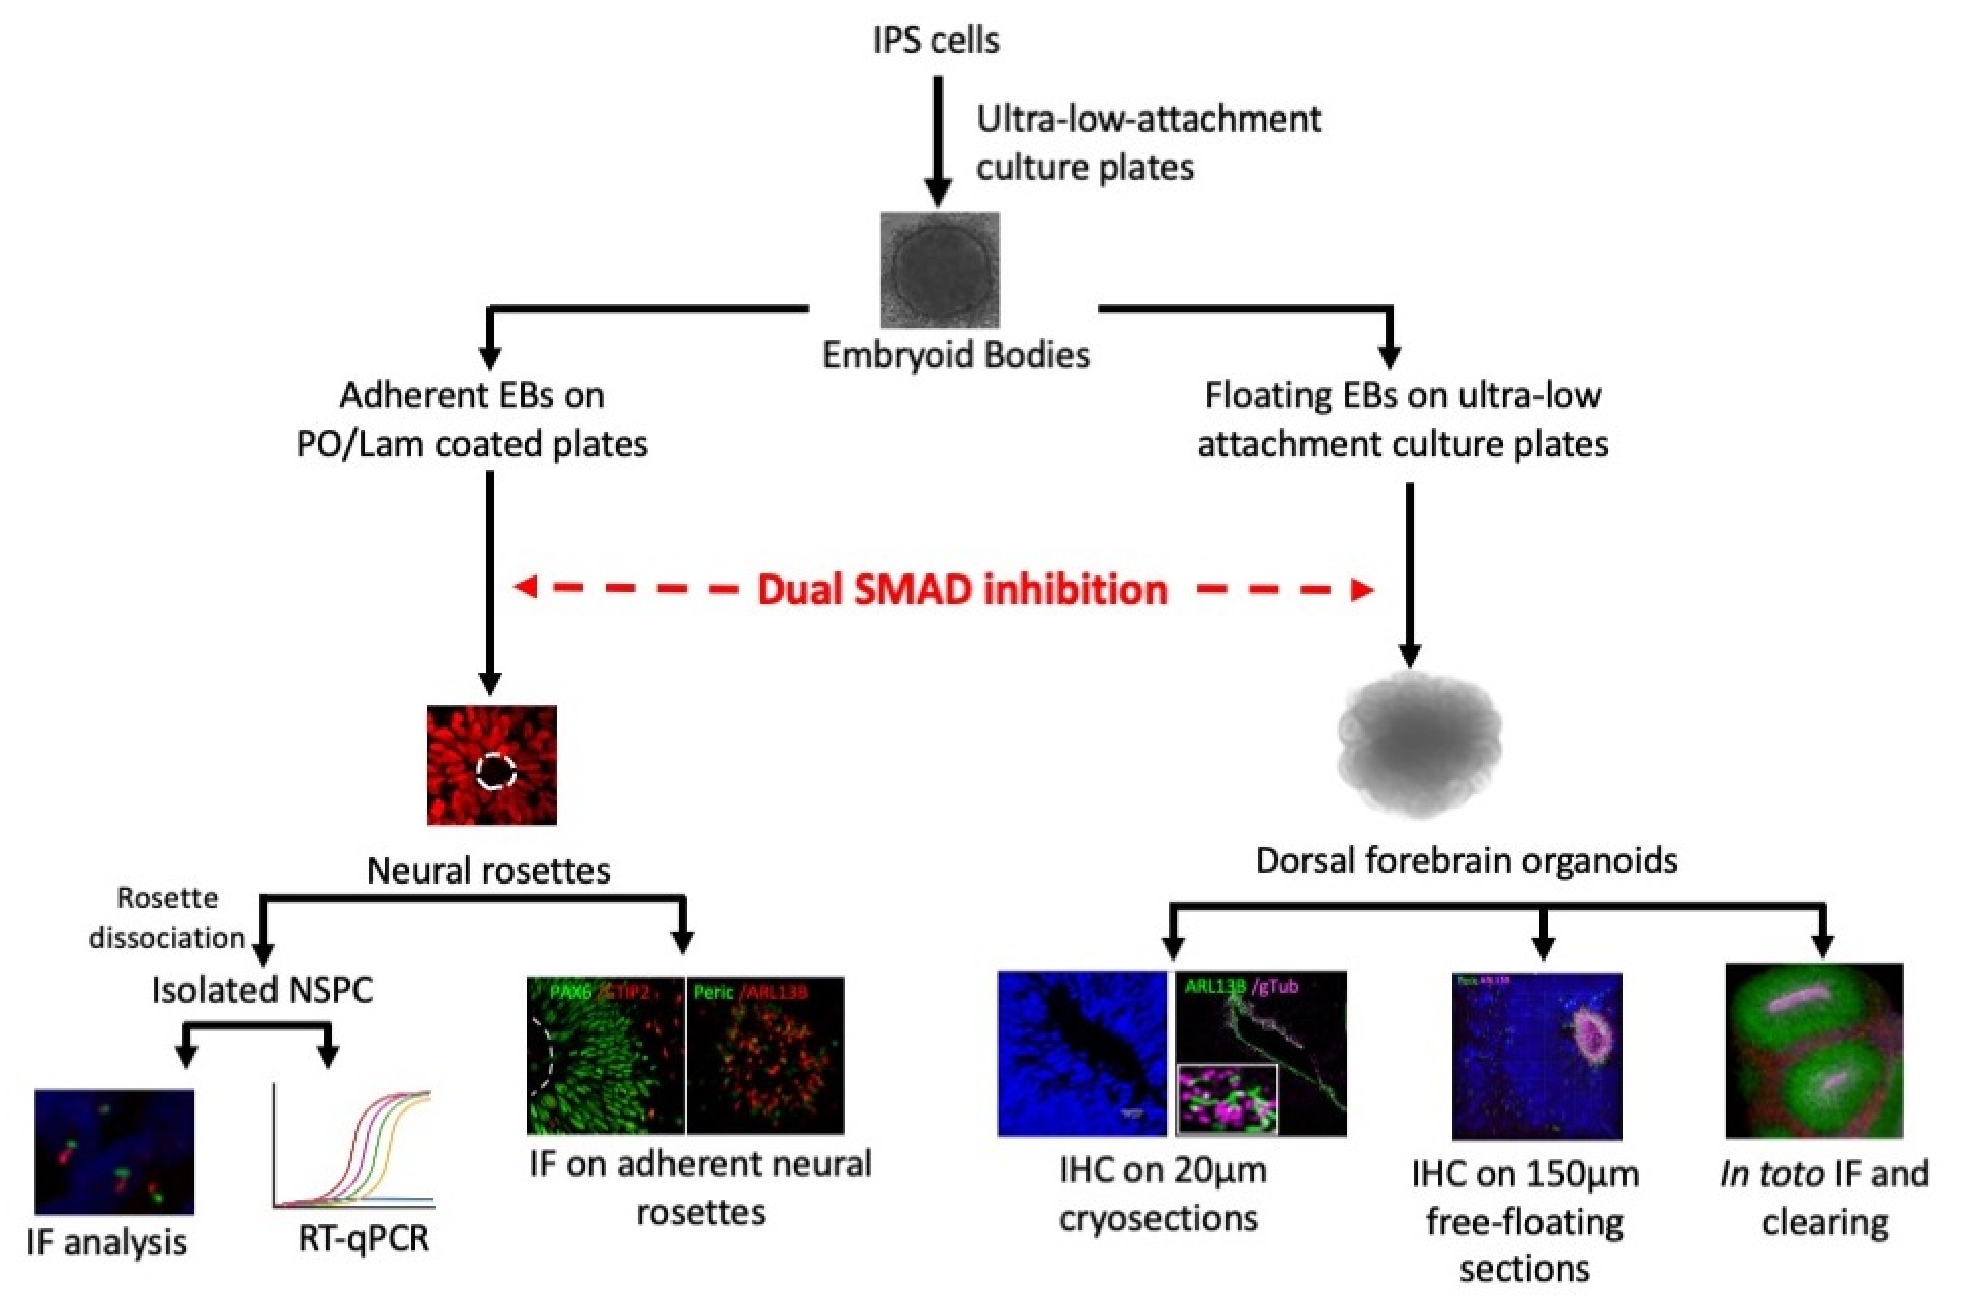 2D and 3D Human Induced Pluripotent Stem Cell-Based Models to